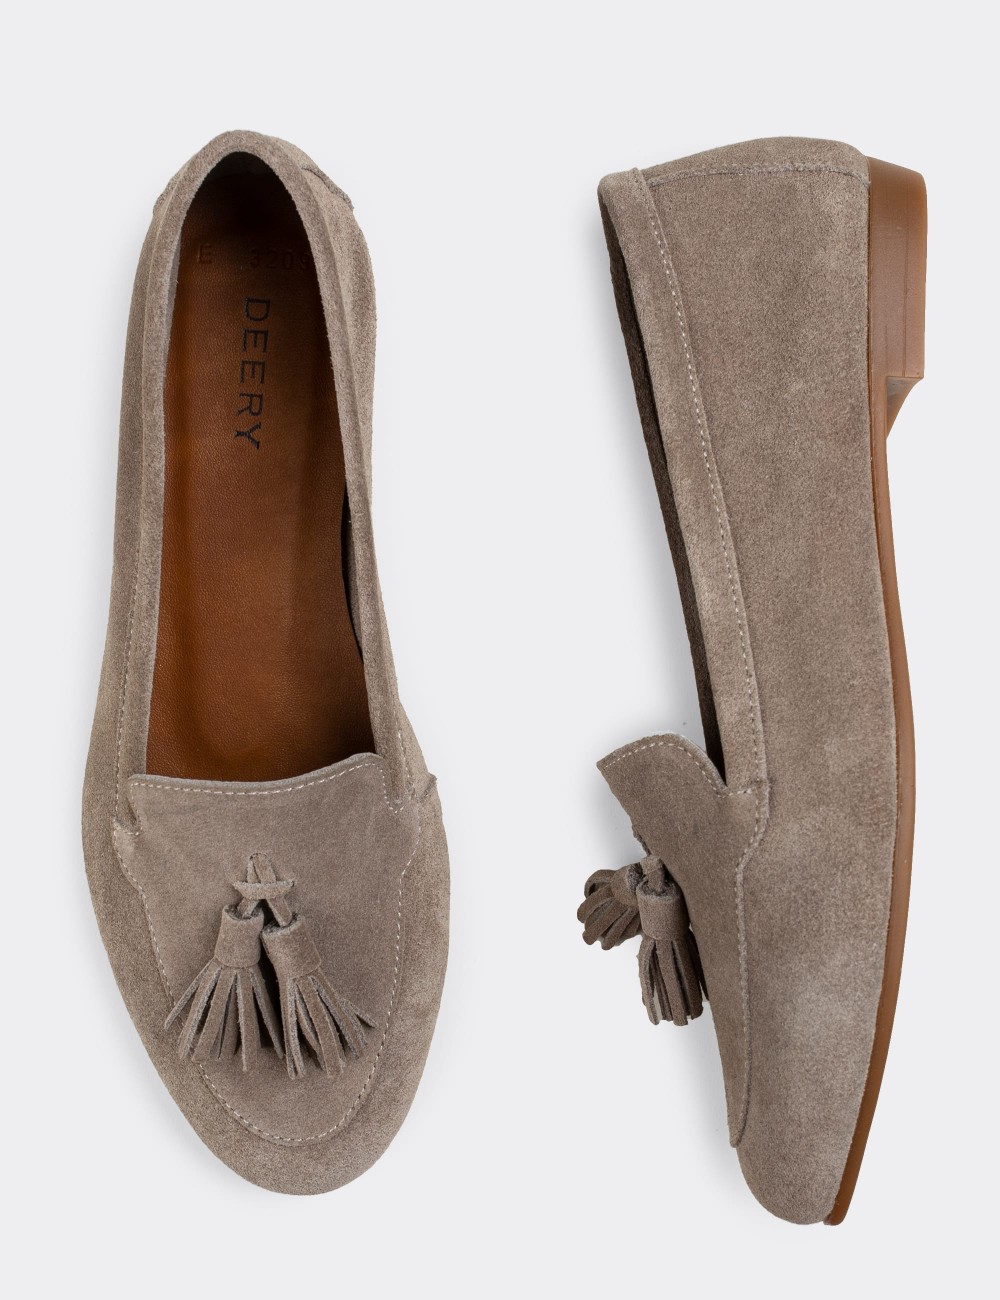 Gray Suede Leather Loafers - E3209ZGRIC02